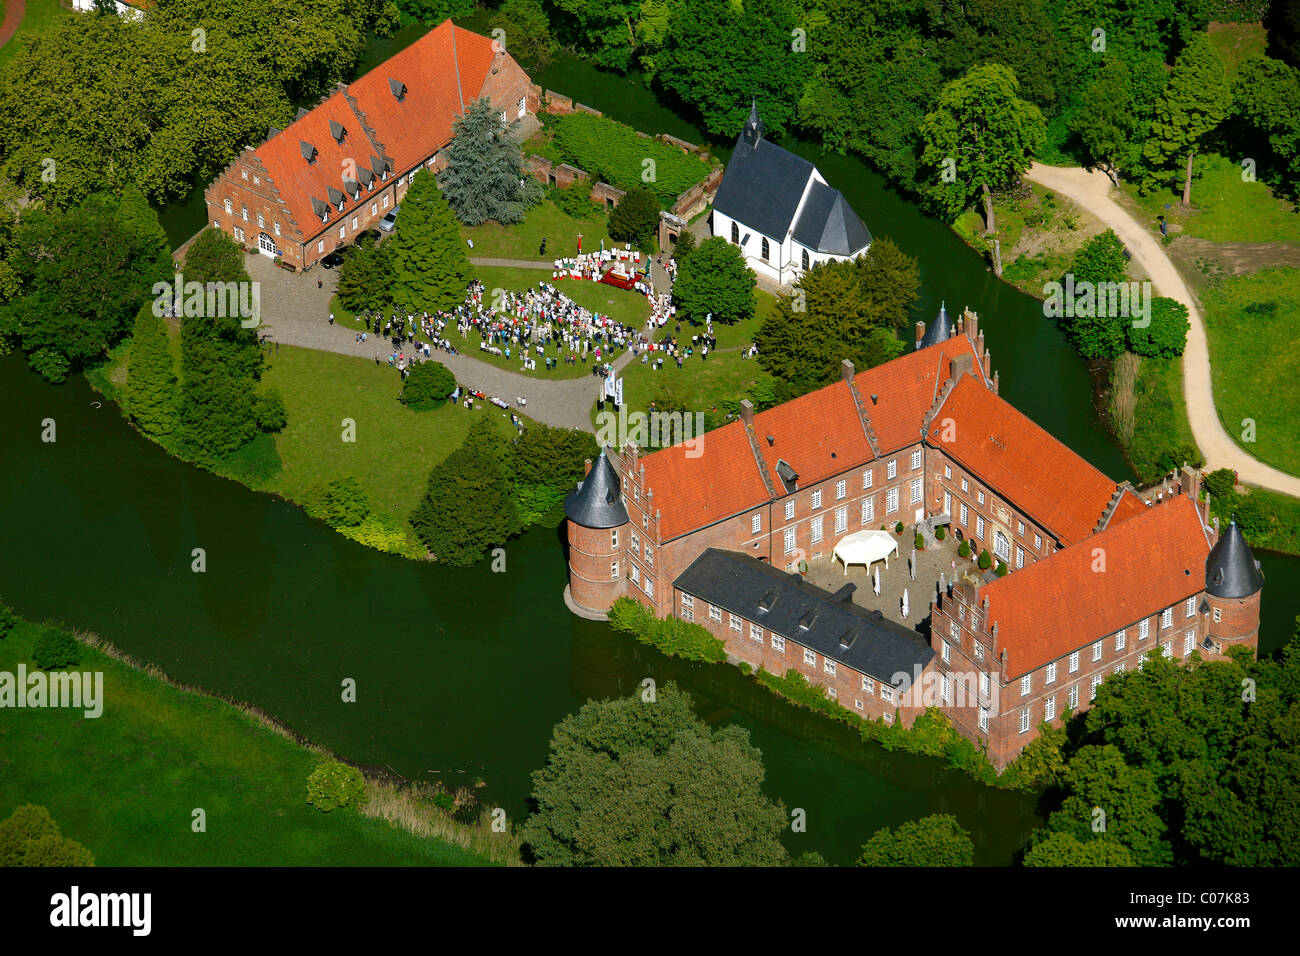 Aerial picture, open air church service on the occasion of the Feast of Corpus Christi, Herten palace gardens Stock Photo